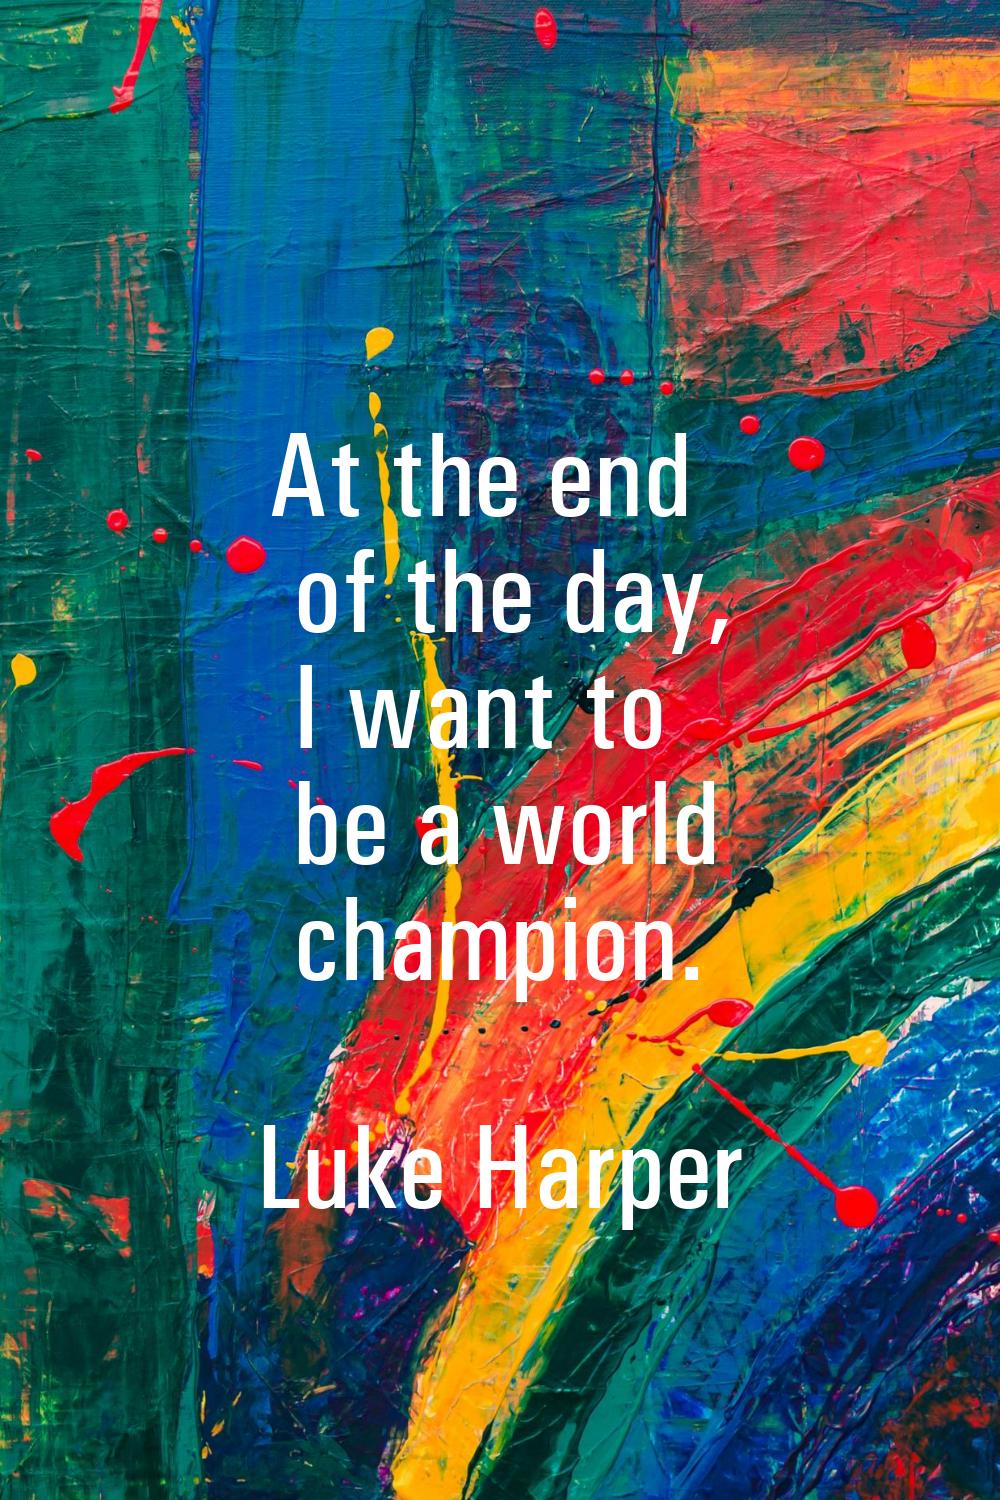 At the end of the day, I want to be a world champion.